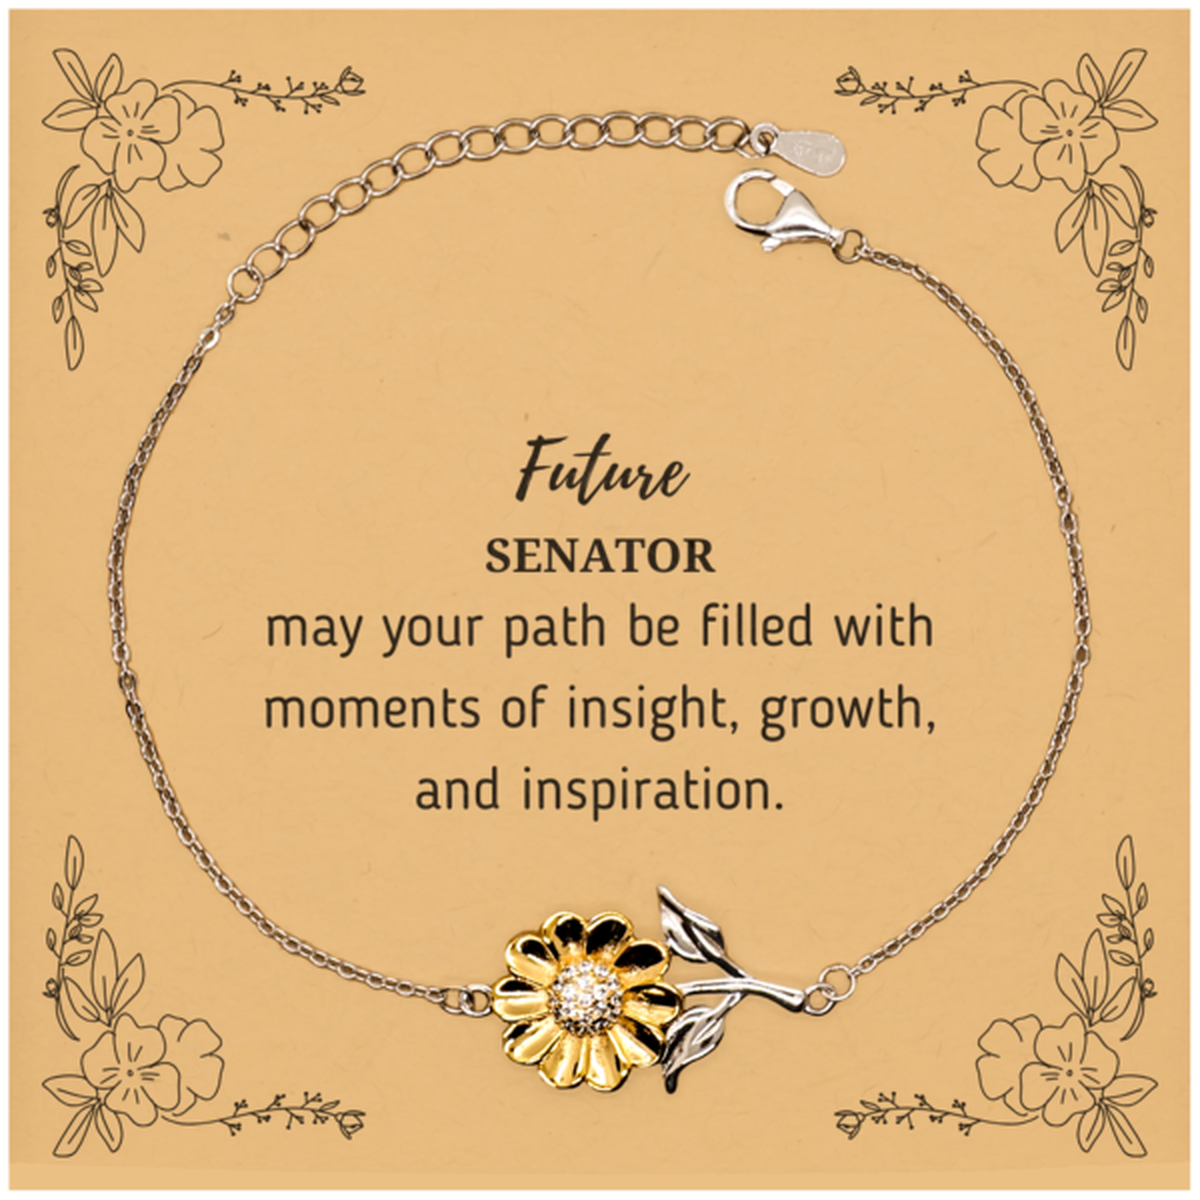 Future Senator Gifts, May your path be filled with moments of insight, Graduation Gifts for New Senator, Christmas Unique Sunflower Bracelet For Men, Women, Friends